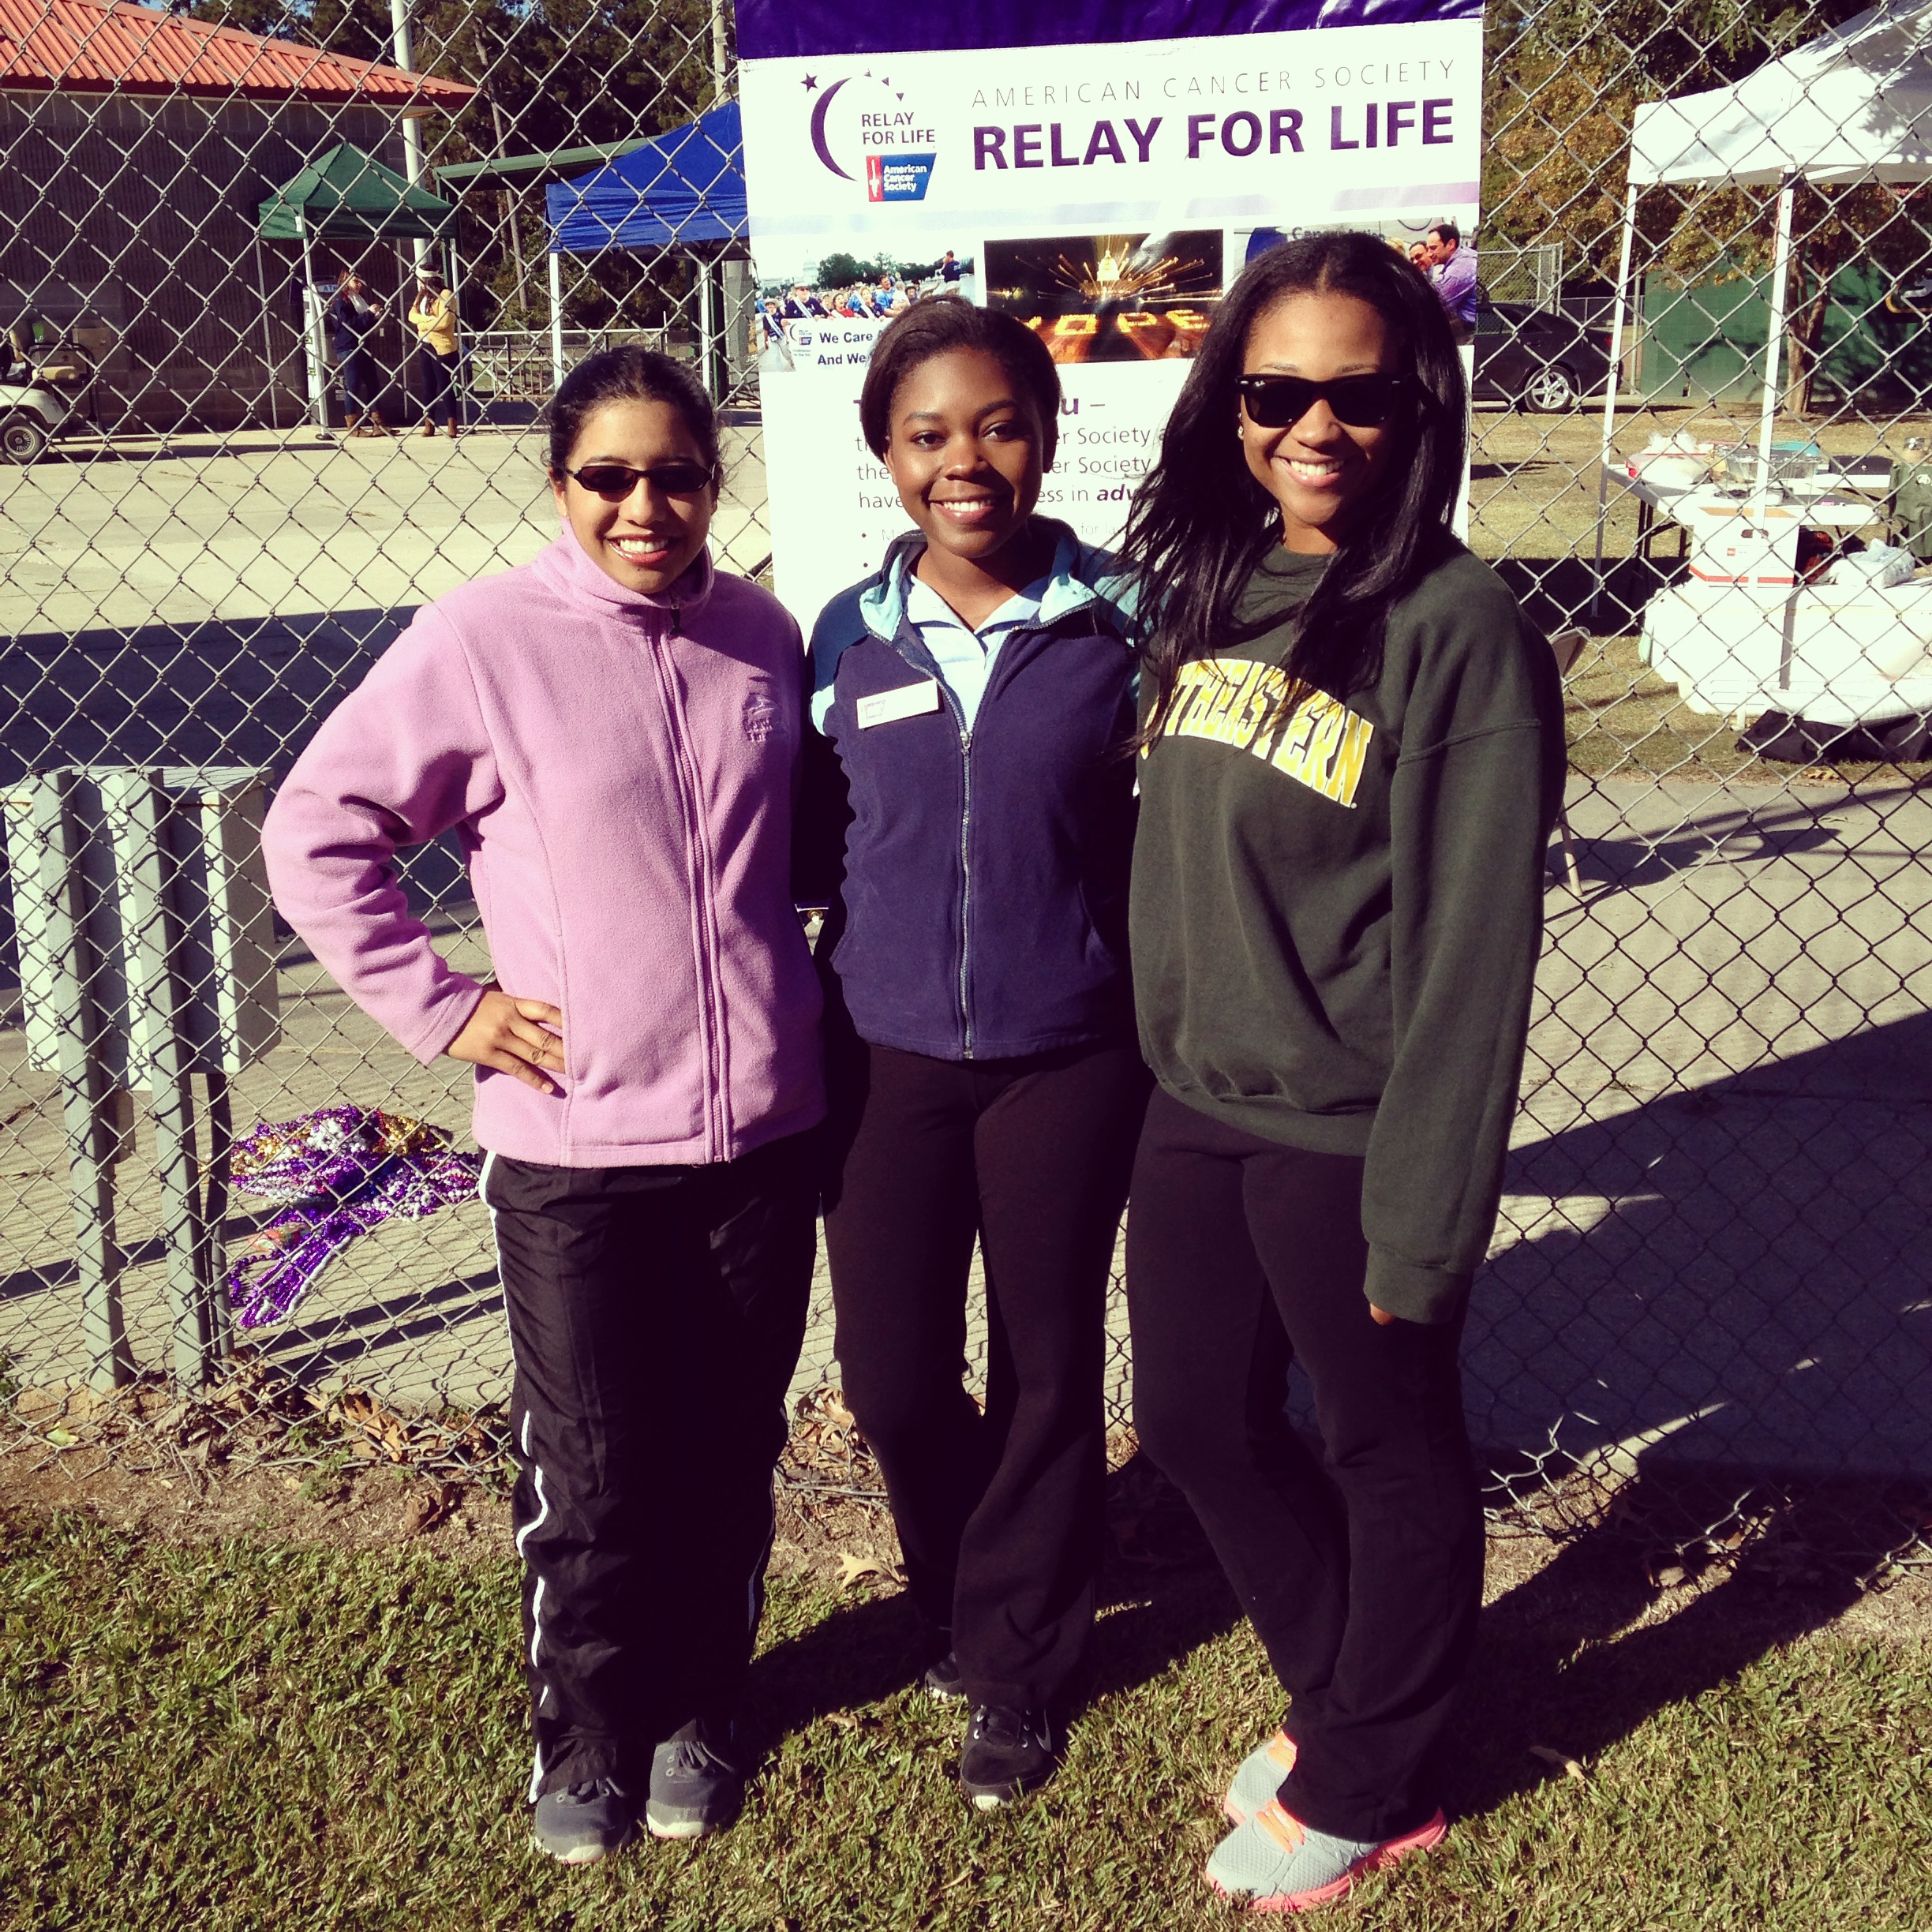  Jasmine poses with PRSSA members, Maria Goddard and Jada Davis, at the 2014 Relay For Life.&nbsp; 